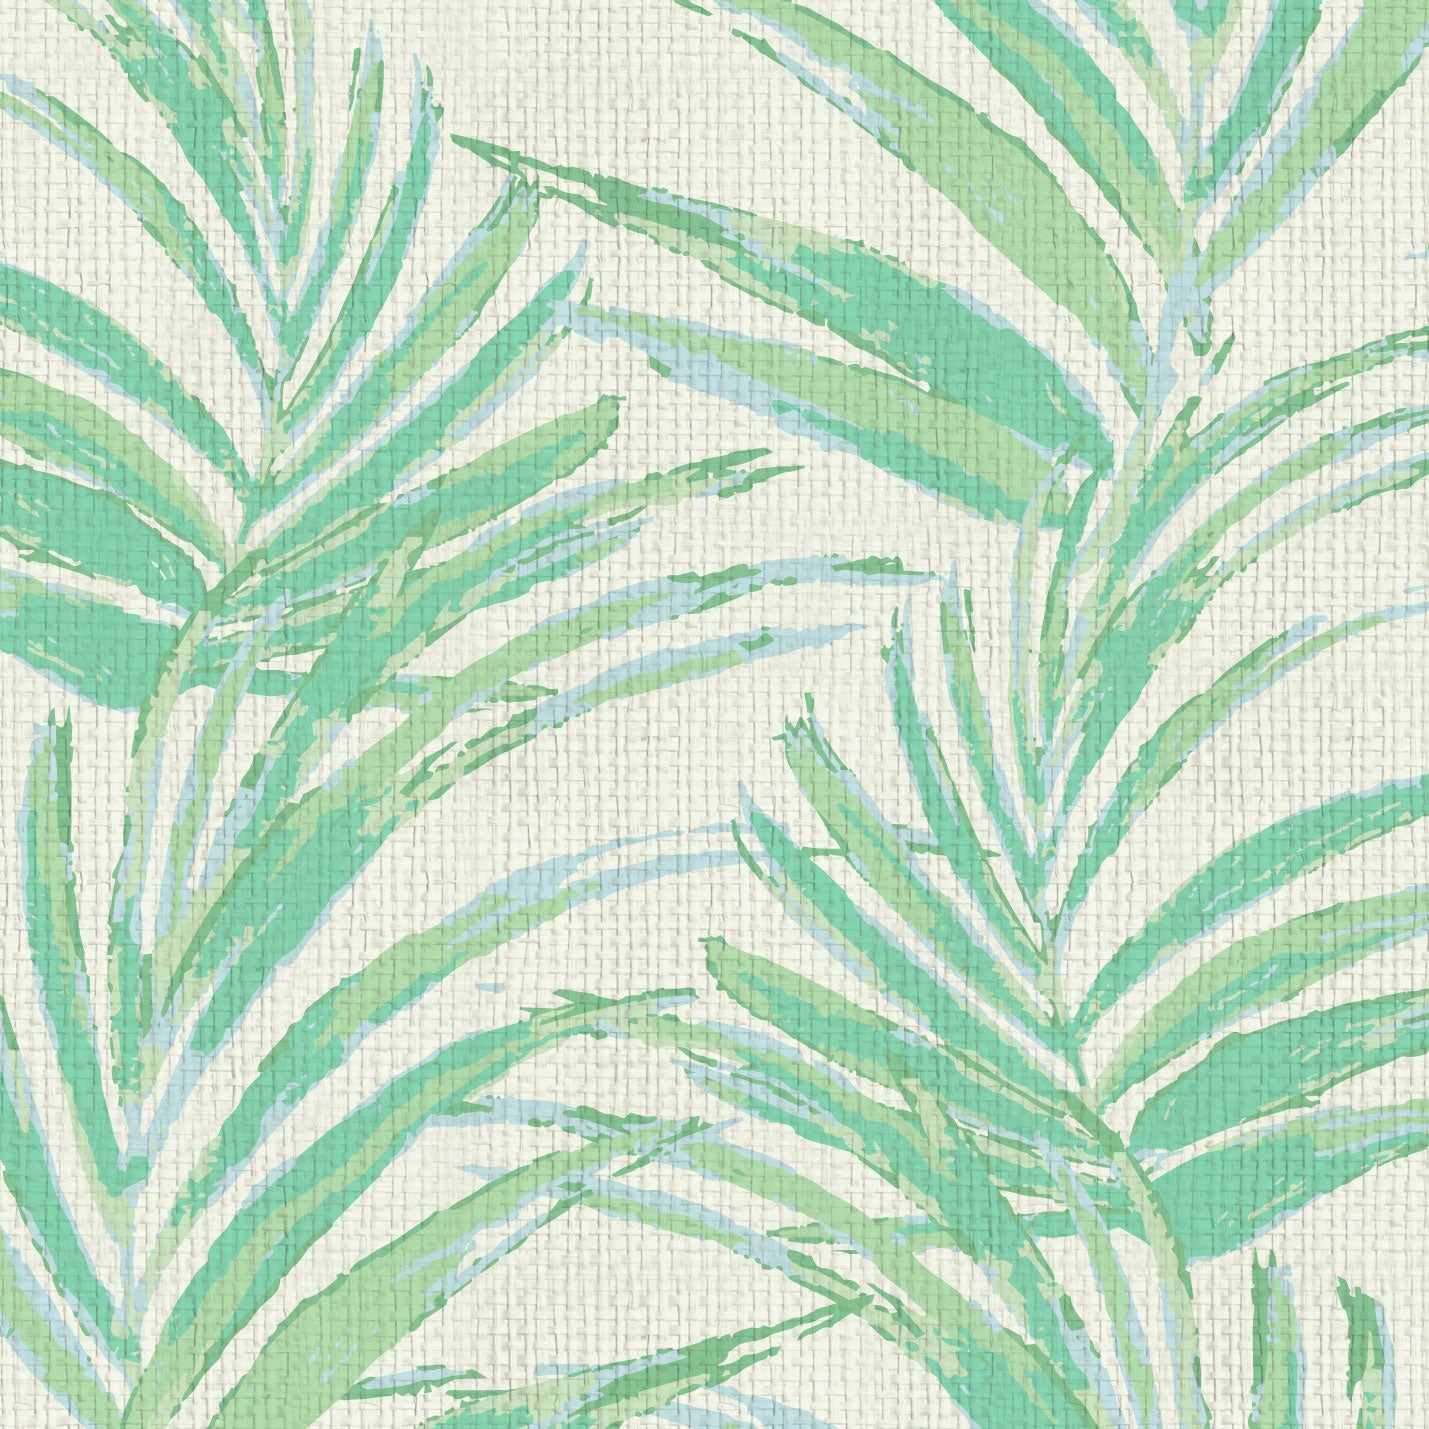 paper weave printed wallpaper of linear twisted palm leaves vertical oversized stripes Grasscloth Natural Textured Eco-Friendly Non-toxic High-quality Sustainable practices Sustainability Interior Design Wall covering Bold Wallpaper Custom Tailor-made Retro chic Tropical jungle beverly hills hilton hotel palm print garden botanical Coastal Seashore Waterfront Vacation home styling Retreat Relaxed beach vibes Beach cottage Shoreline beverly hills hotel ocean blue white cream mint green